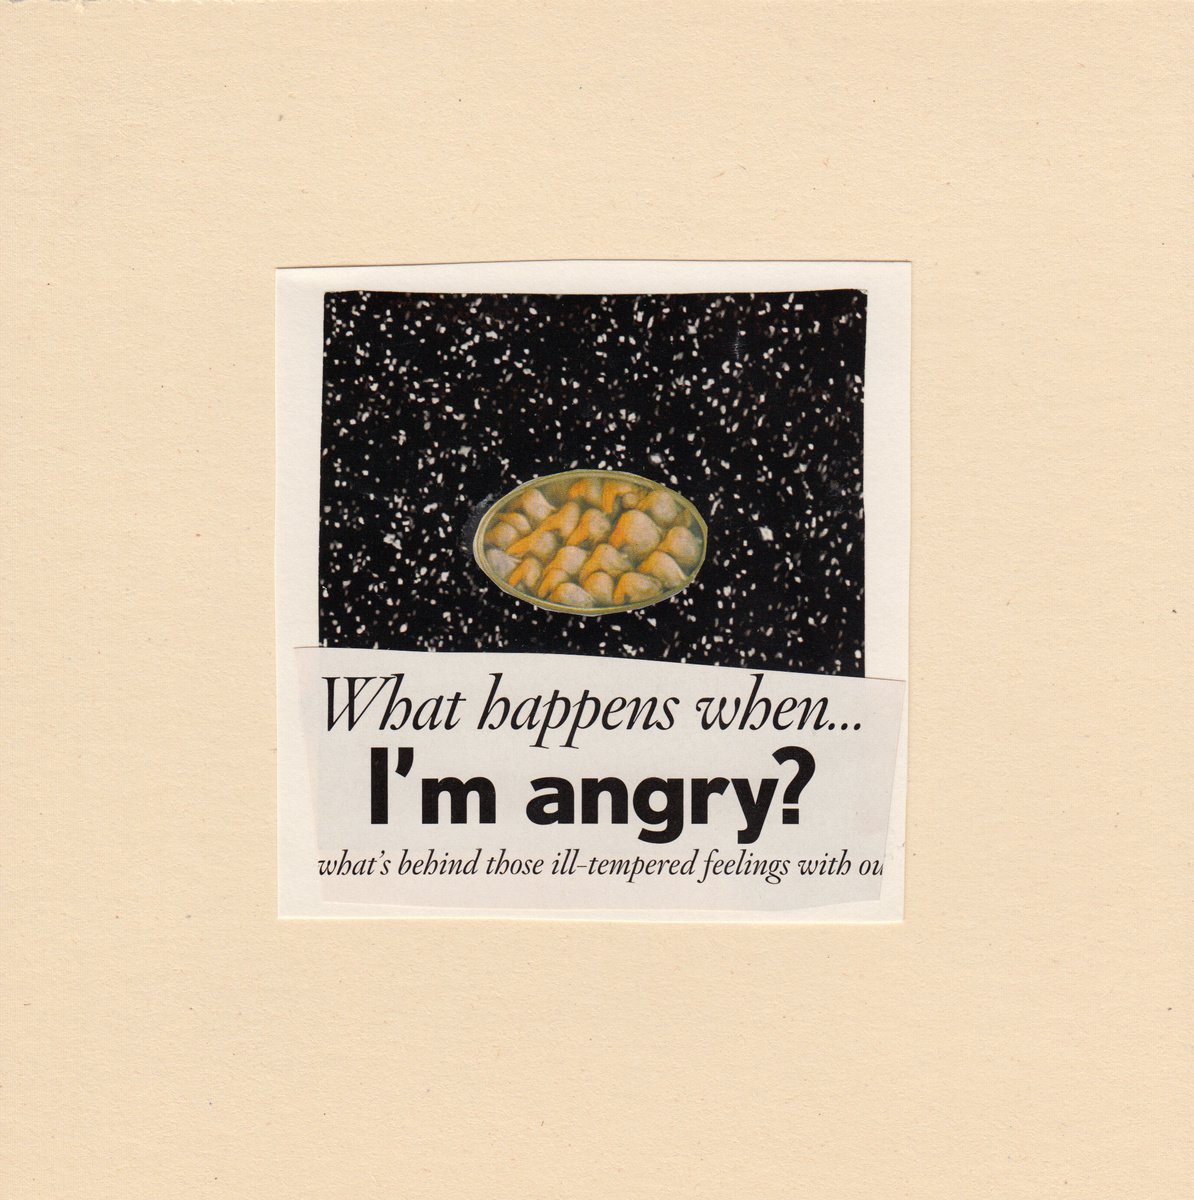 What happens when I’m angry? by Jon Garbet